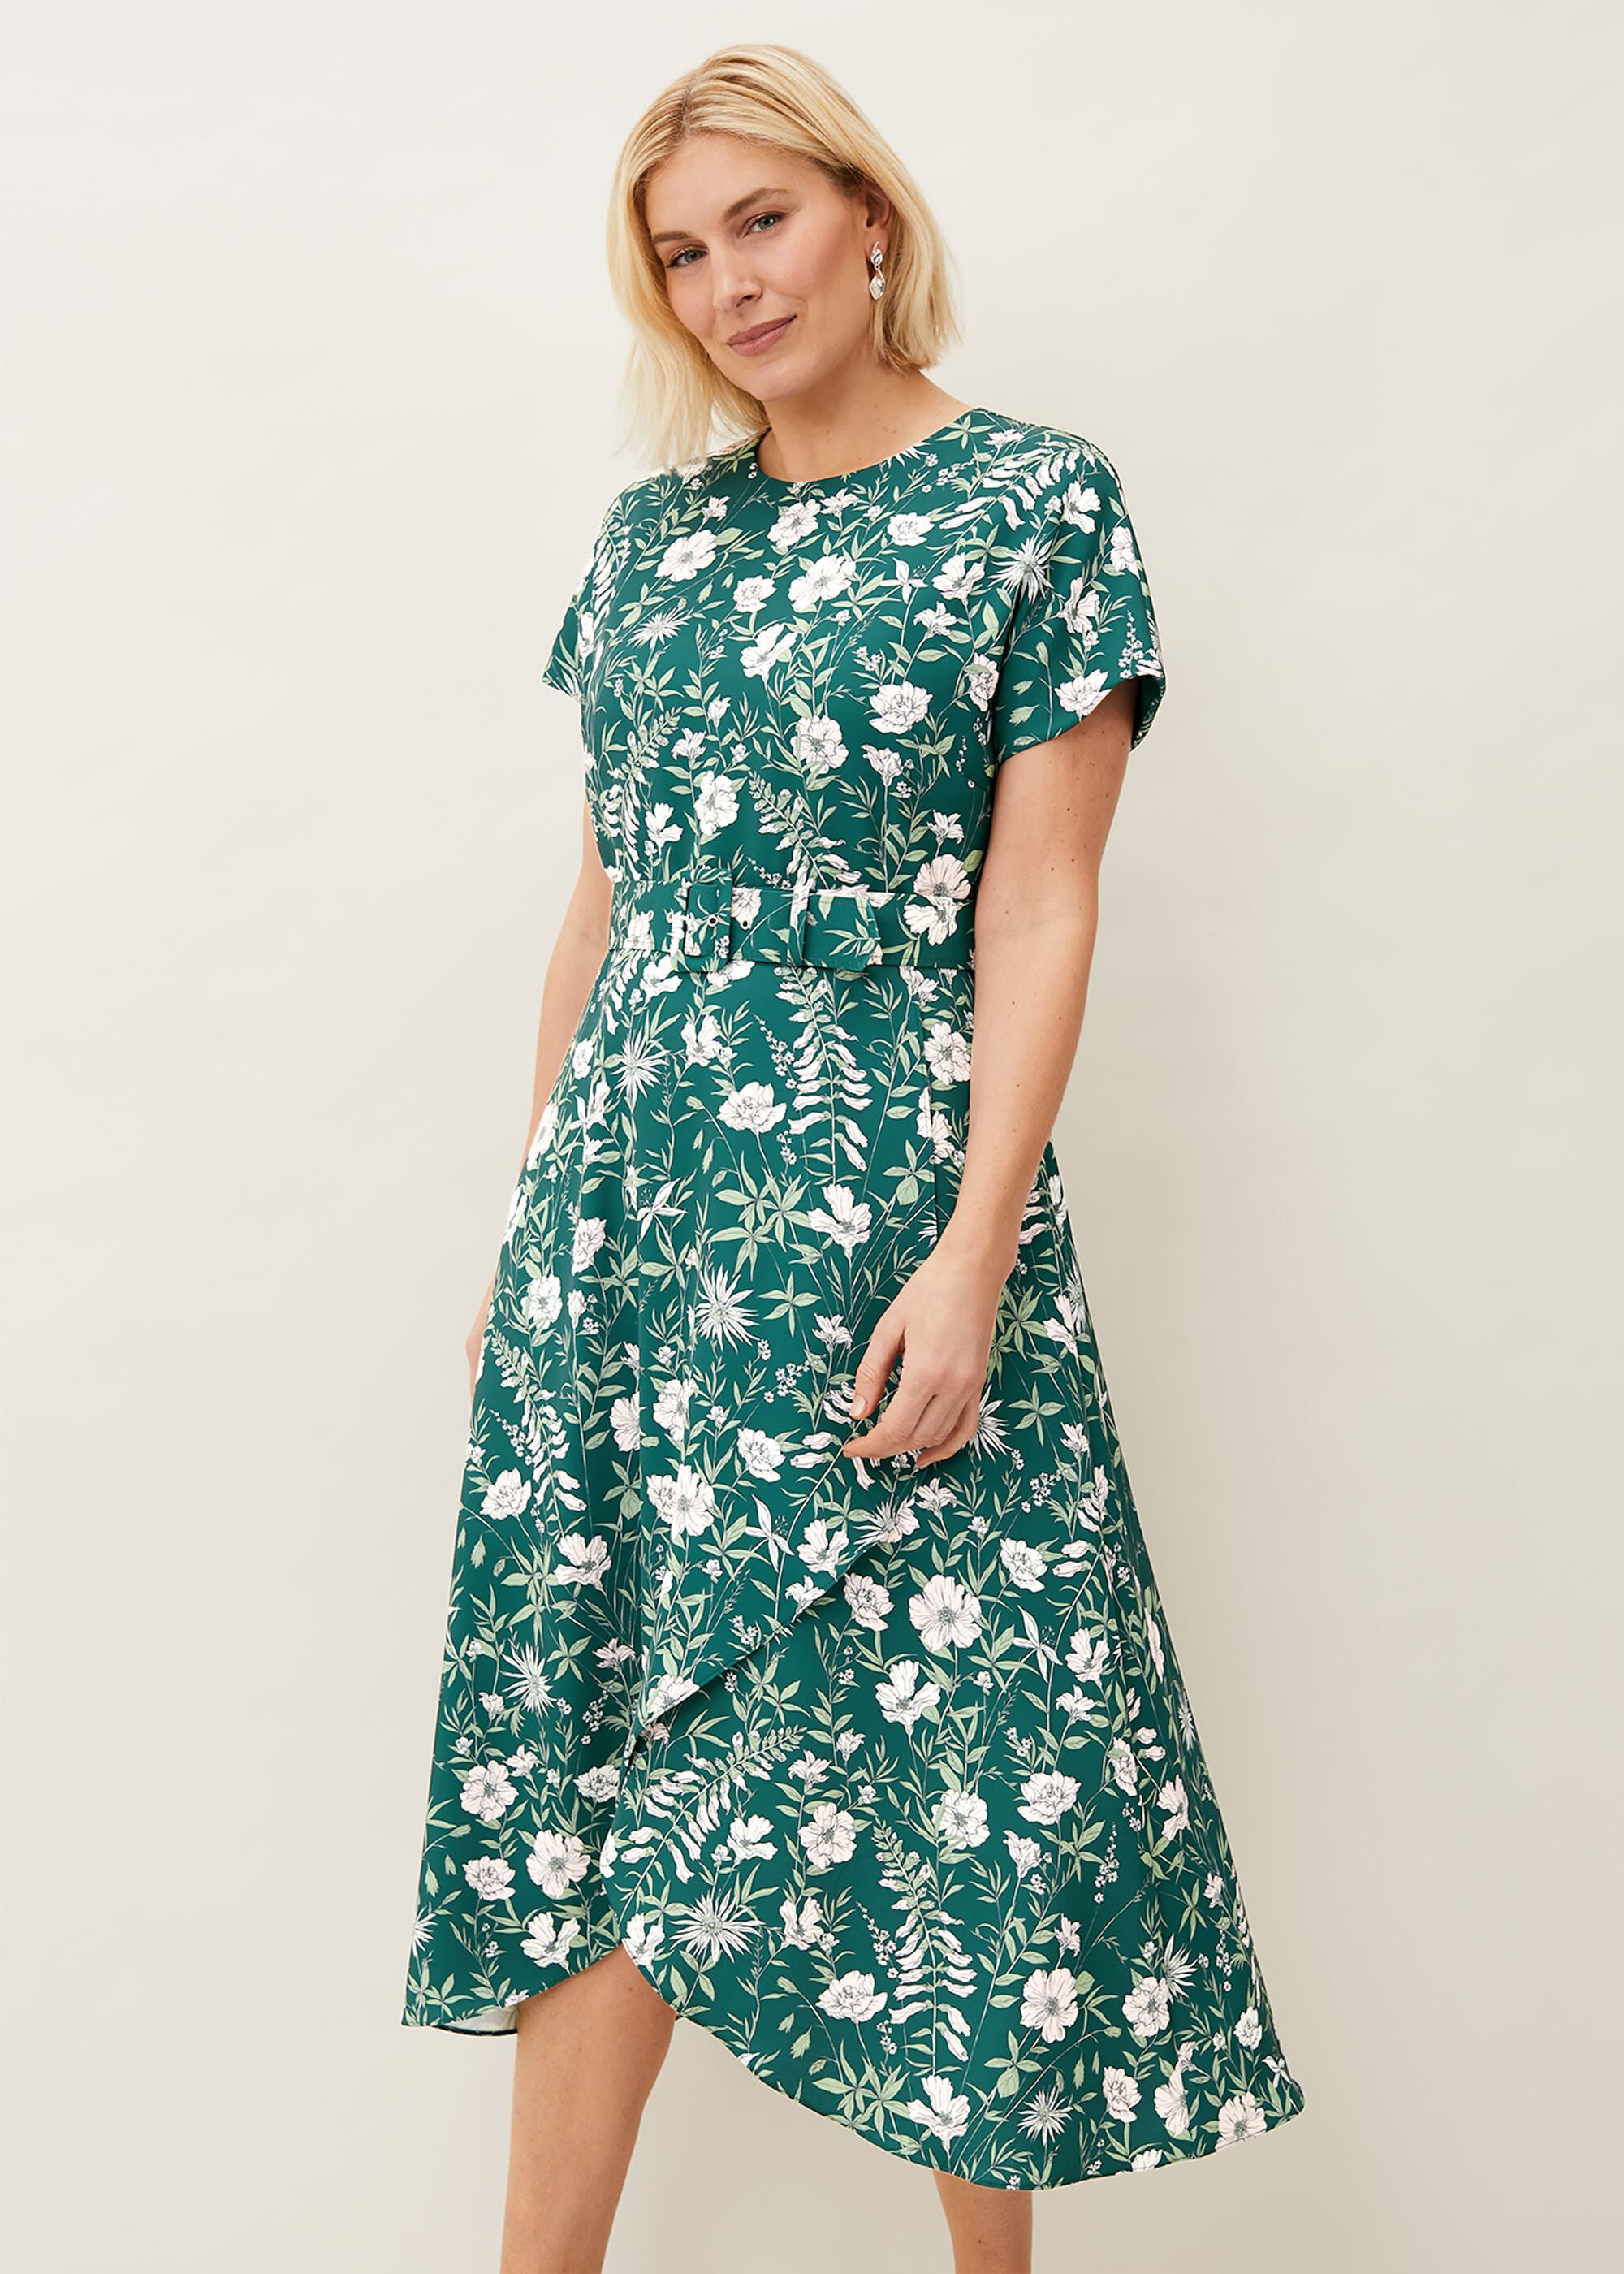 Dee Floral Frill Dress | Phase Eight